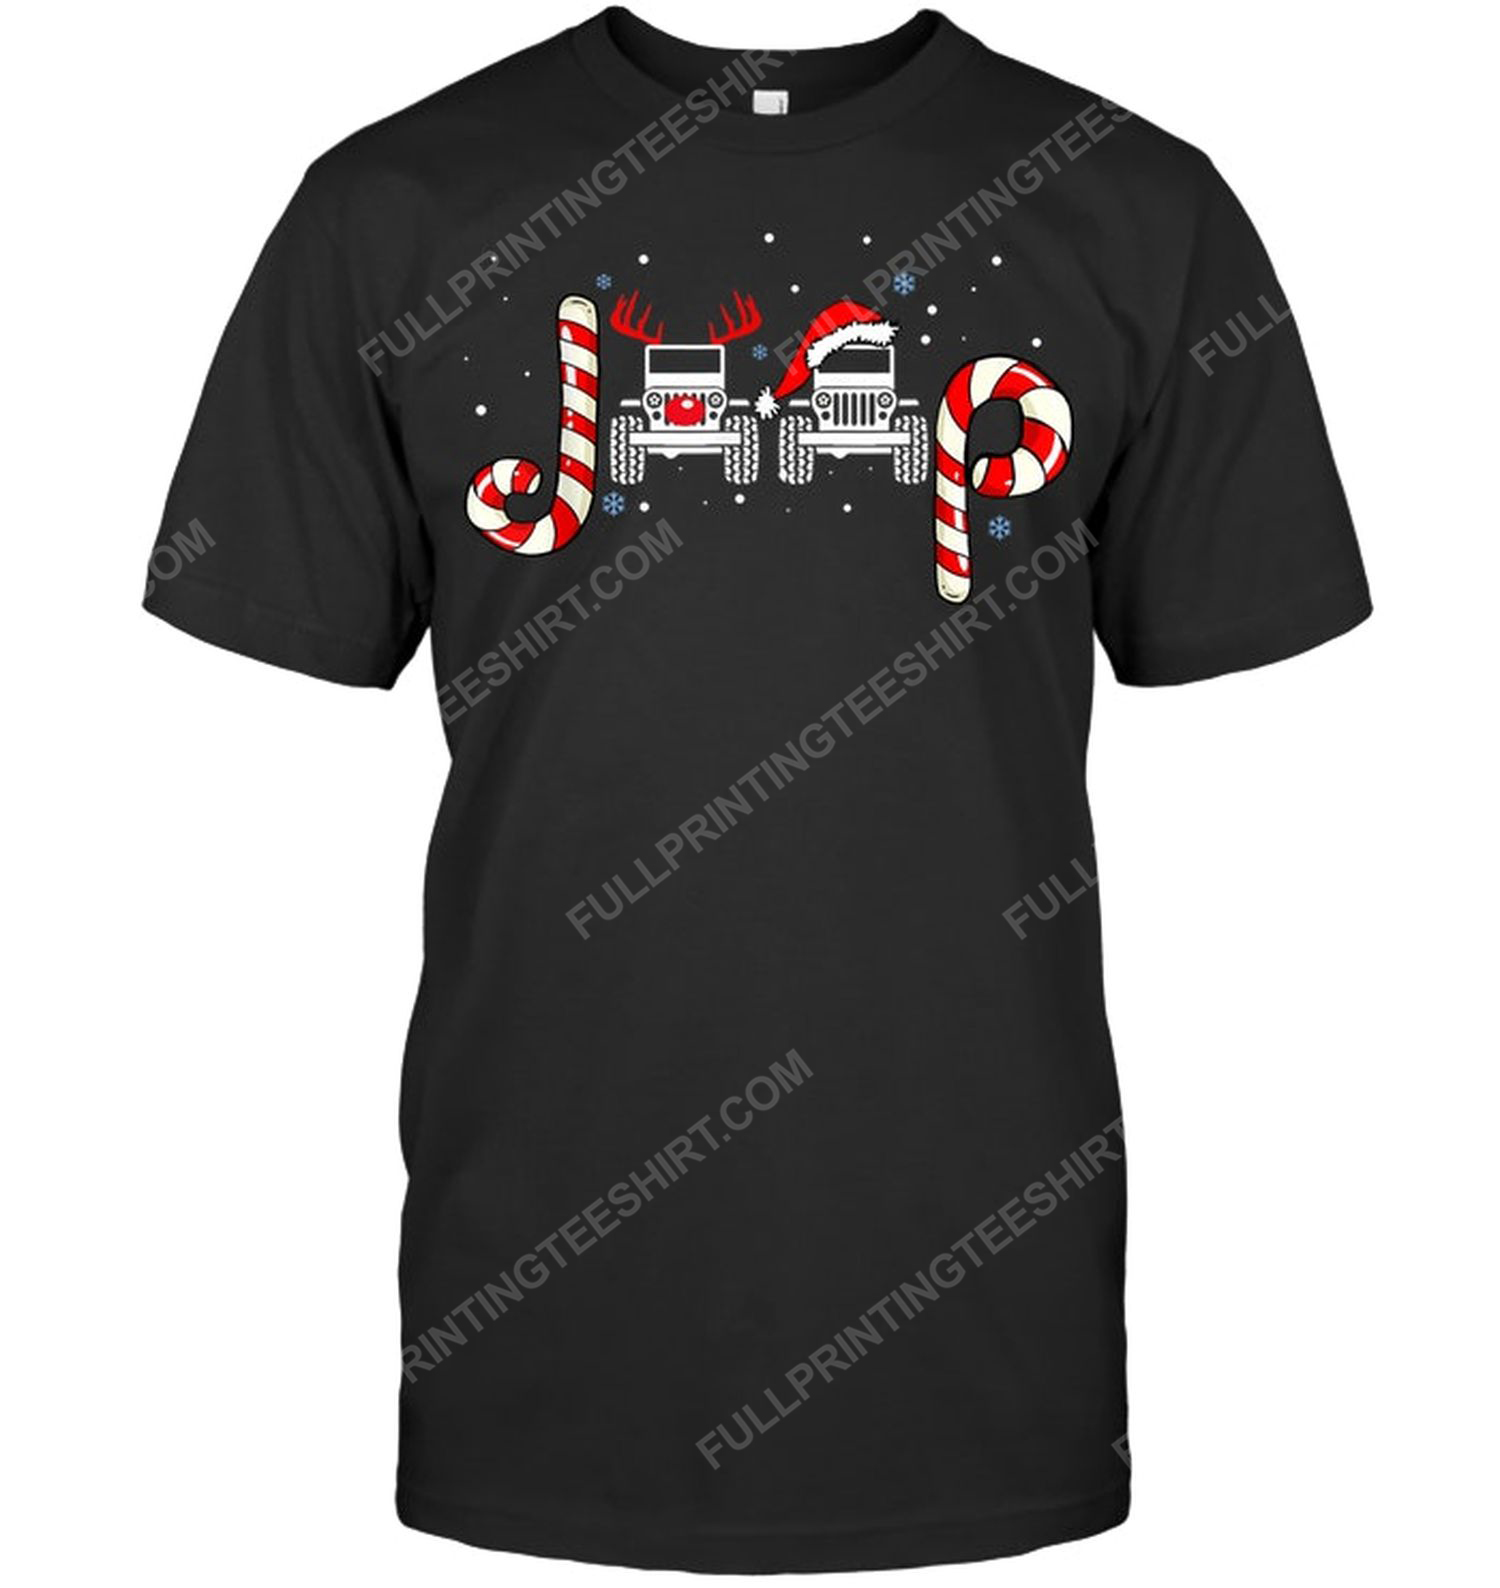 Christmas time jeep car and candy cane tshirt